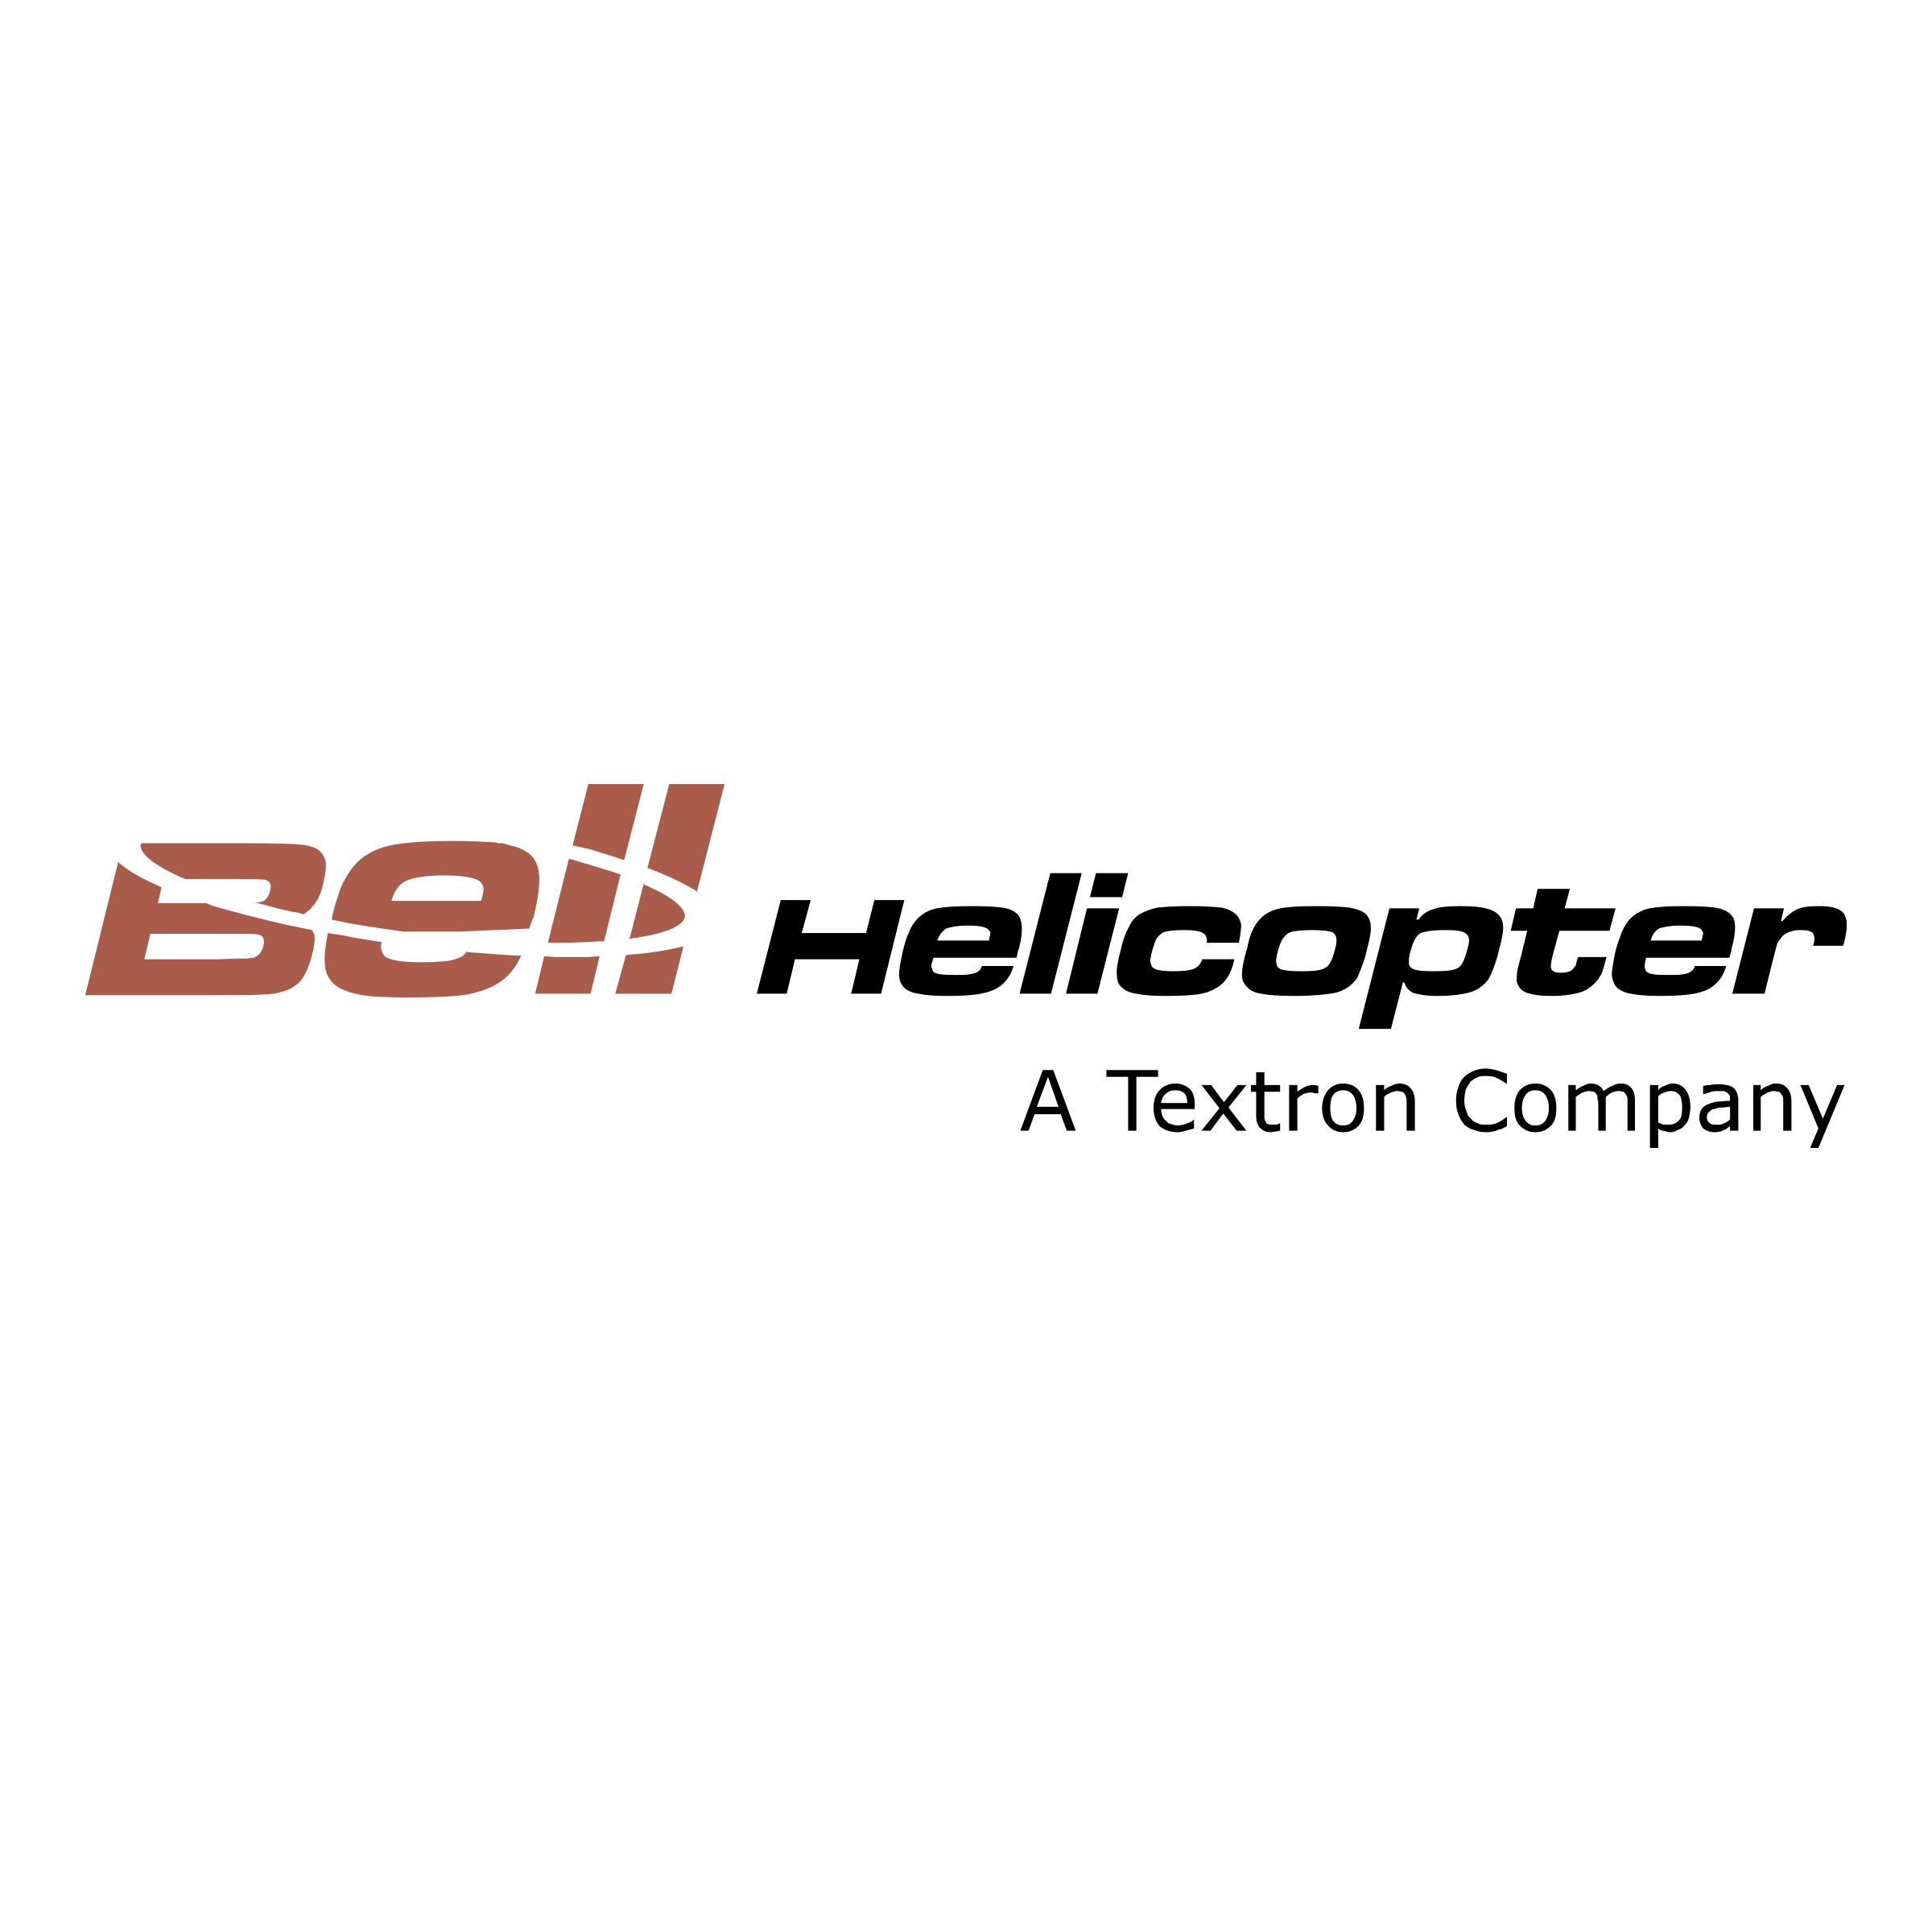 Bell Supply Logo - Bell Helicopter 01 Logo PNG Transparent & SVG Vector - Freebie Supply